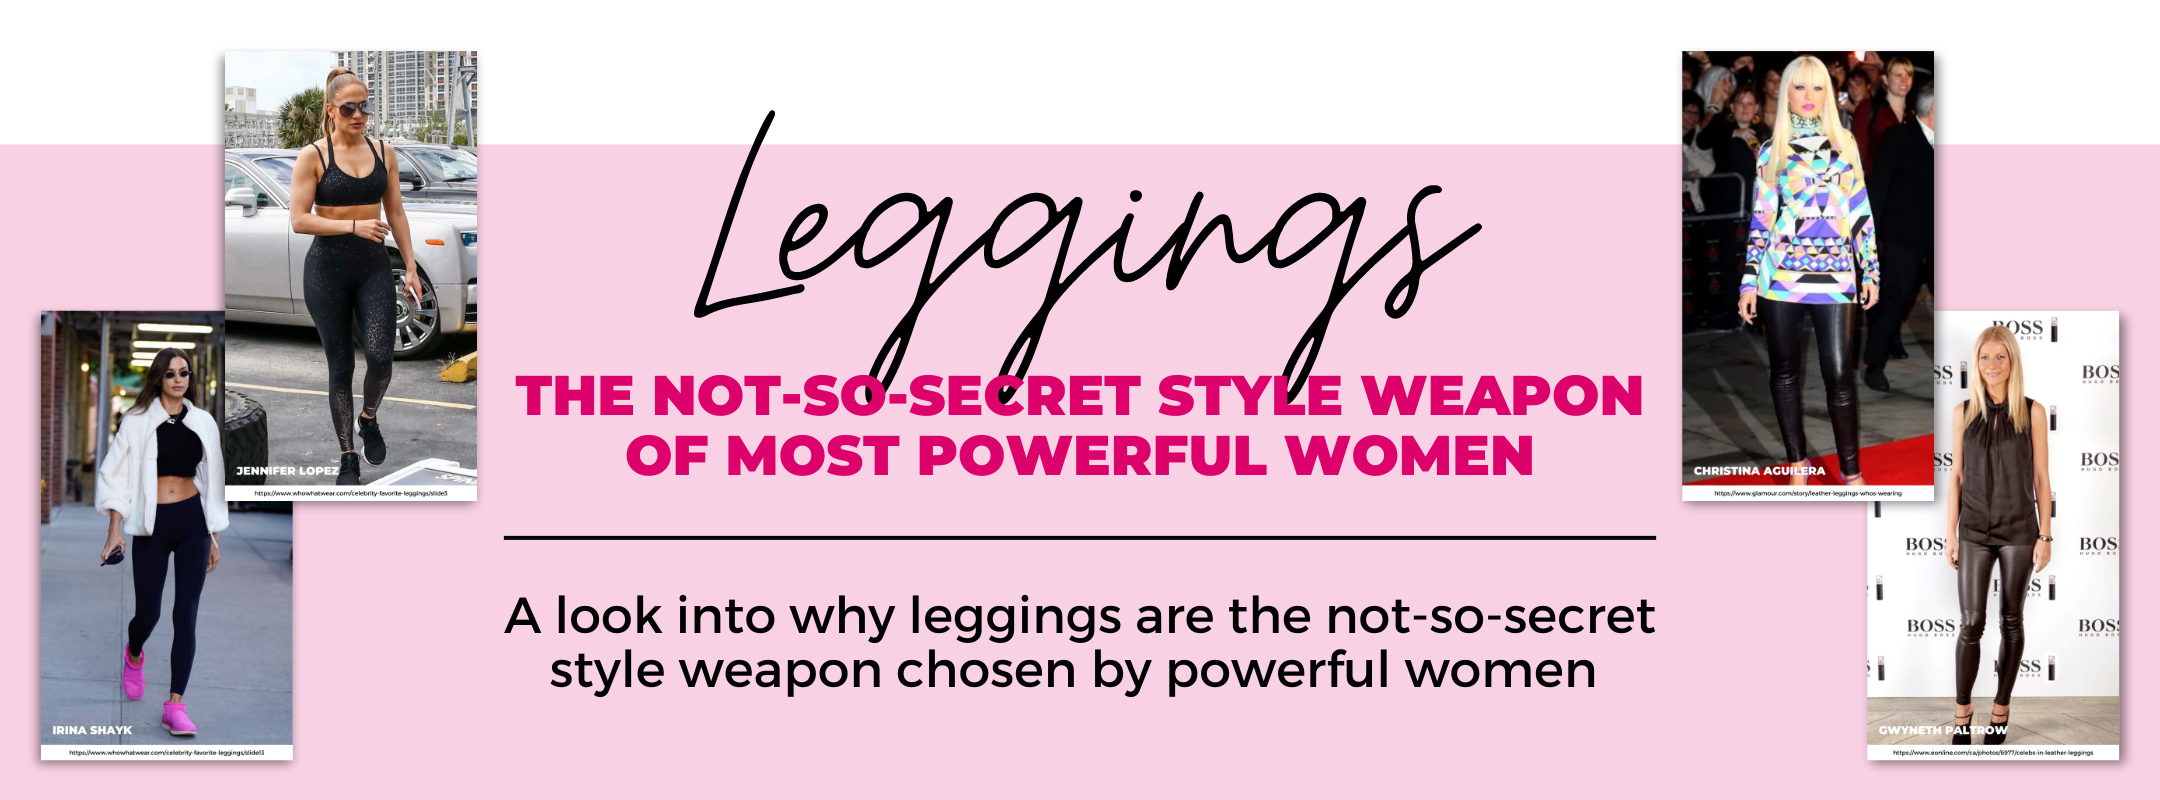 The Not-So-Secret Style Weapon of Most Powerful Women: Leggings